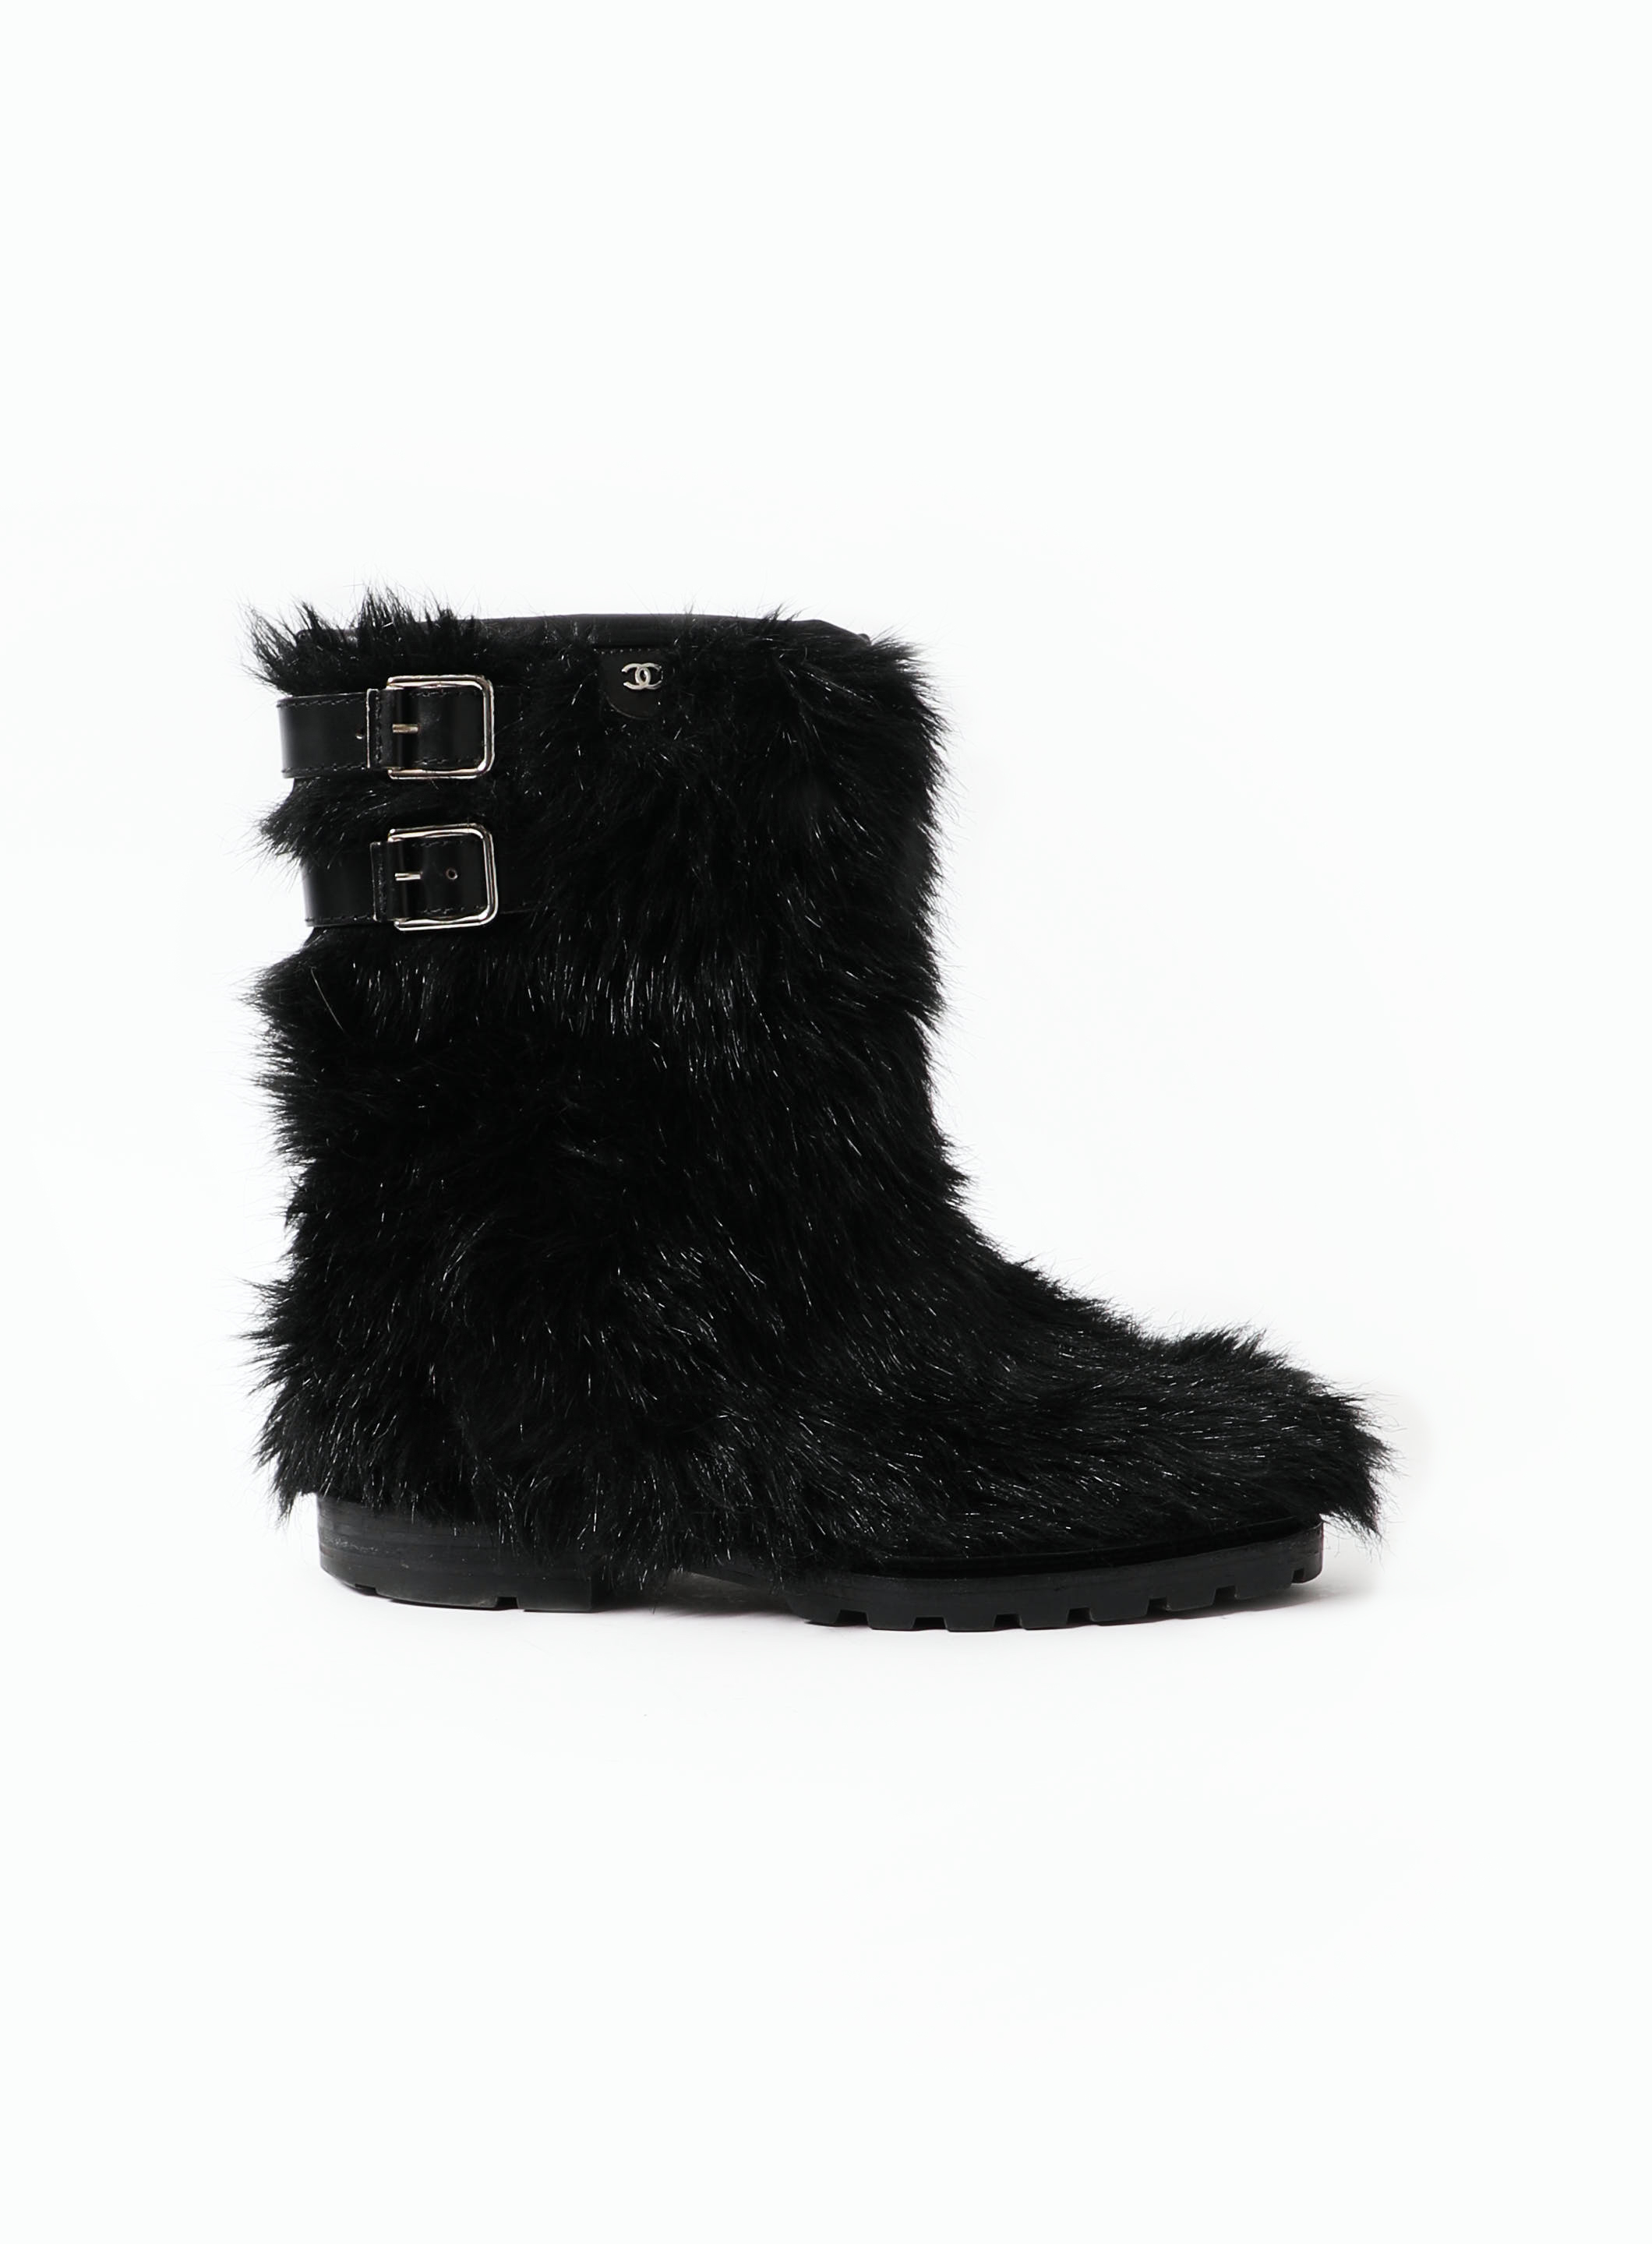 Chanel Fur Boots